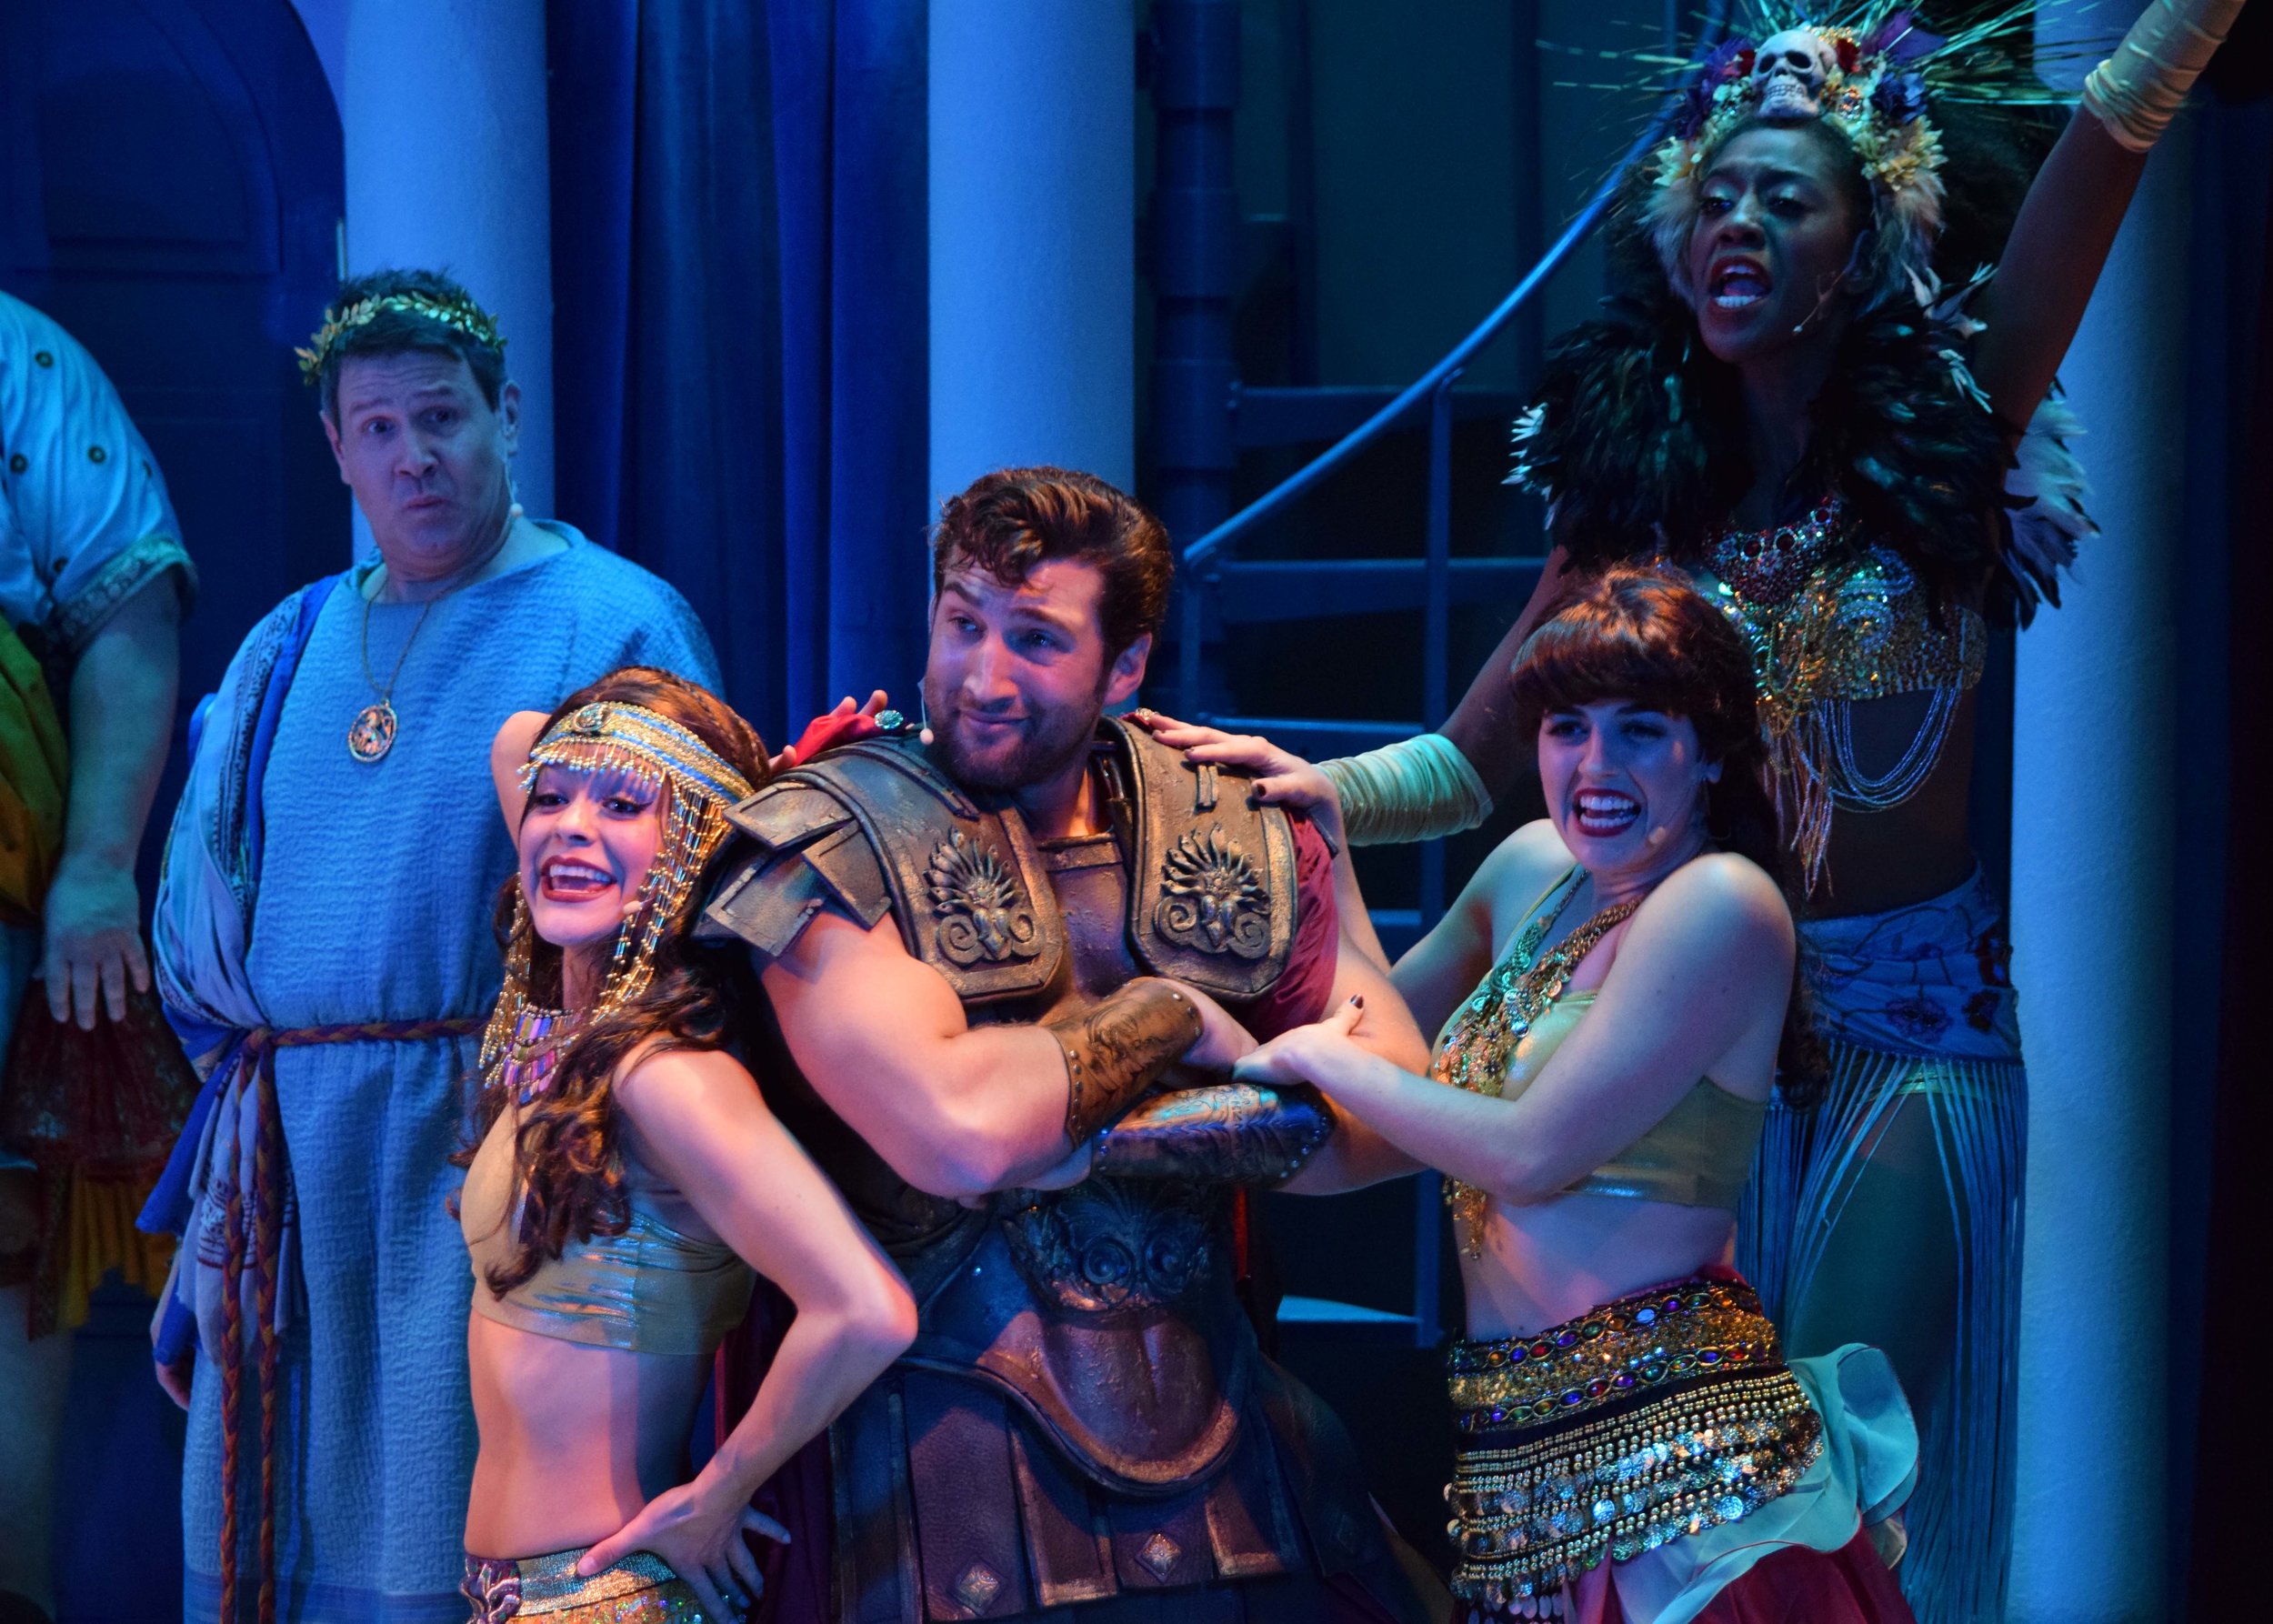  Senex (Kevin Symons) and Miles Glorious (Clayton Snyder) with Courtesans (Liz Bustle, Shamicka Benn, and Vanessa Nichole) in A Funny Thing Happened On The Way To The Forum at the Garry Marshall Theatre. Photo by Chelsea Sutton. 